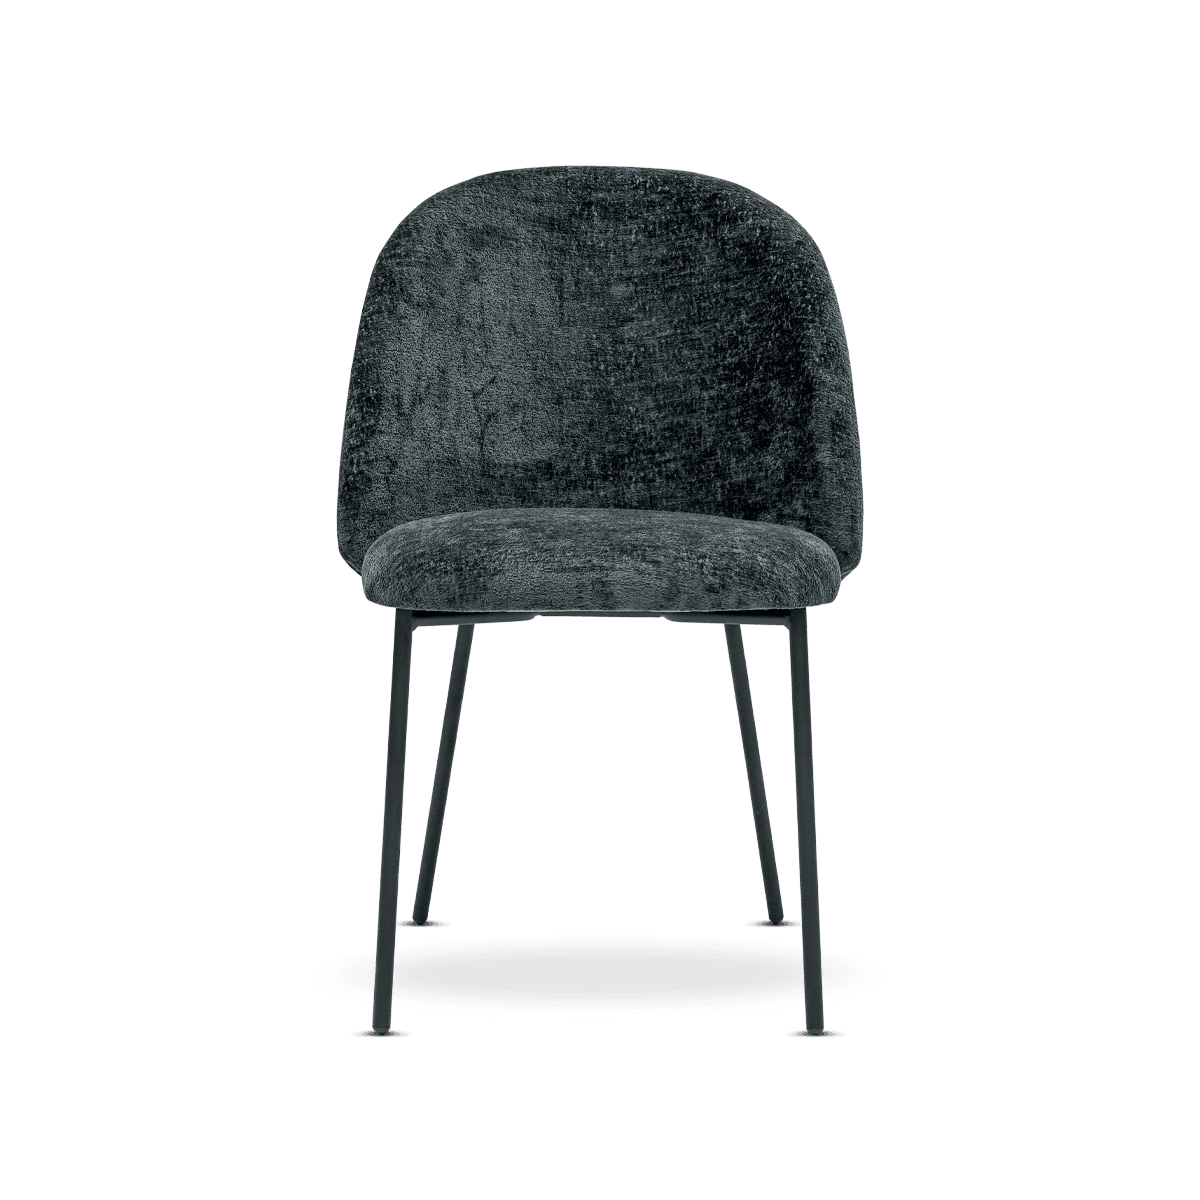 Tuka 2183 Dining Chair,Black/Anthracite